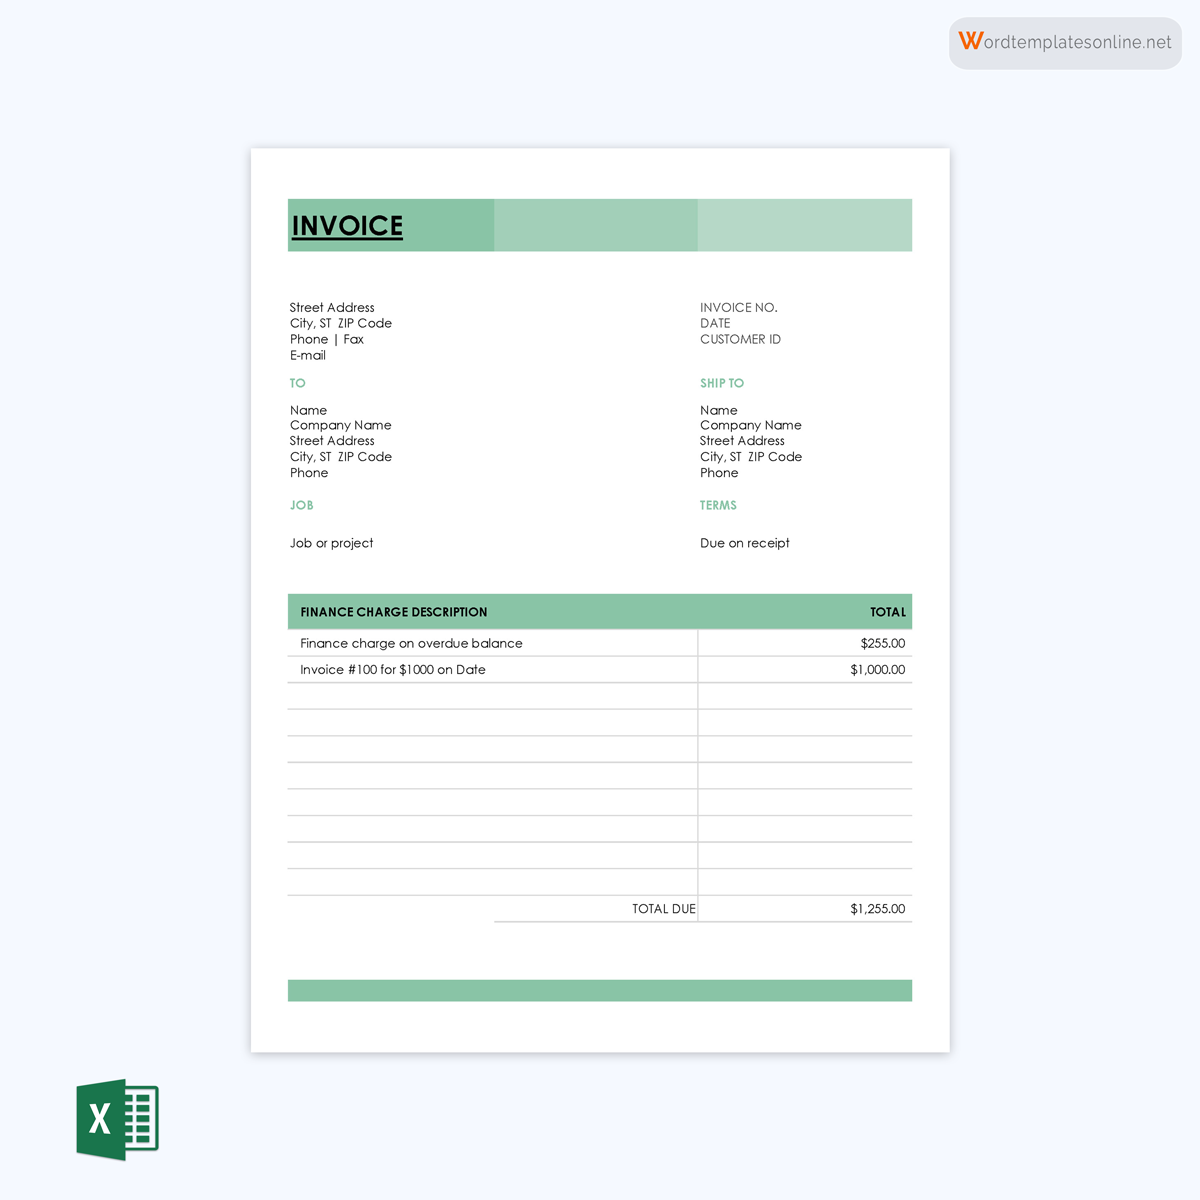 Blank invoice template Excel - Free Download